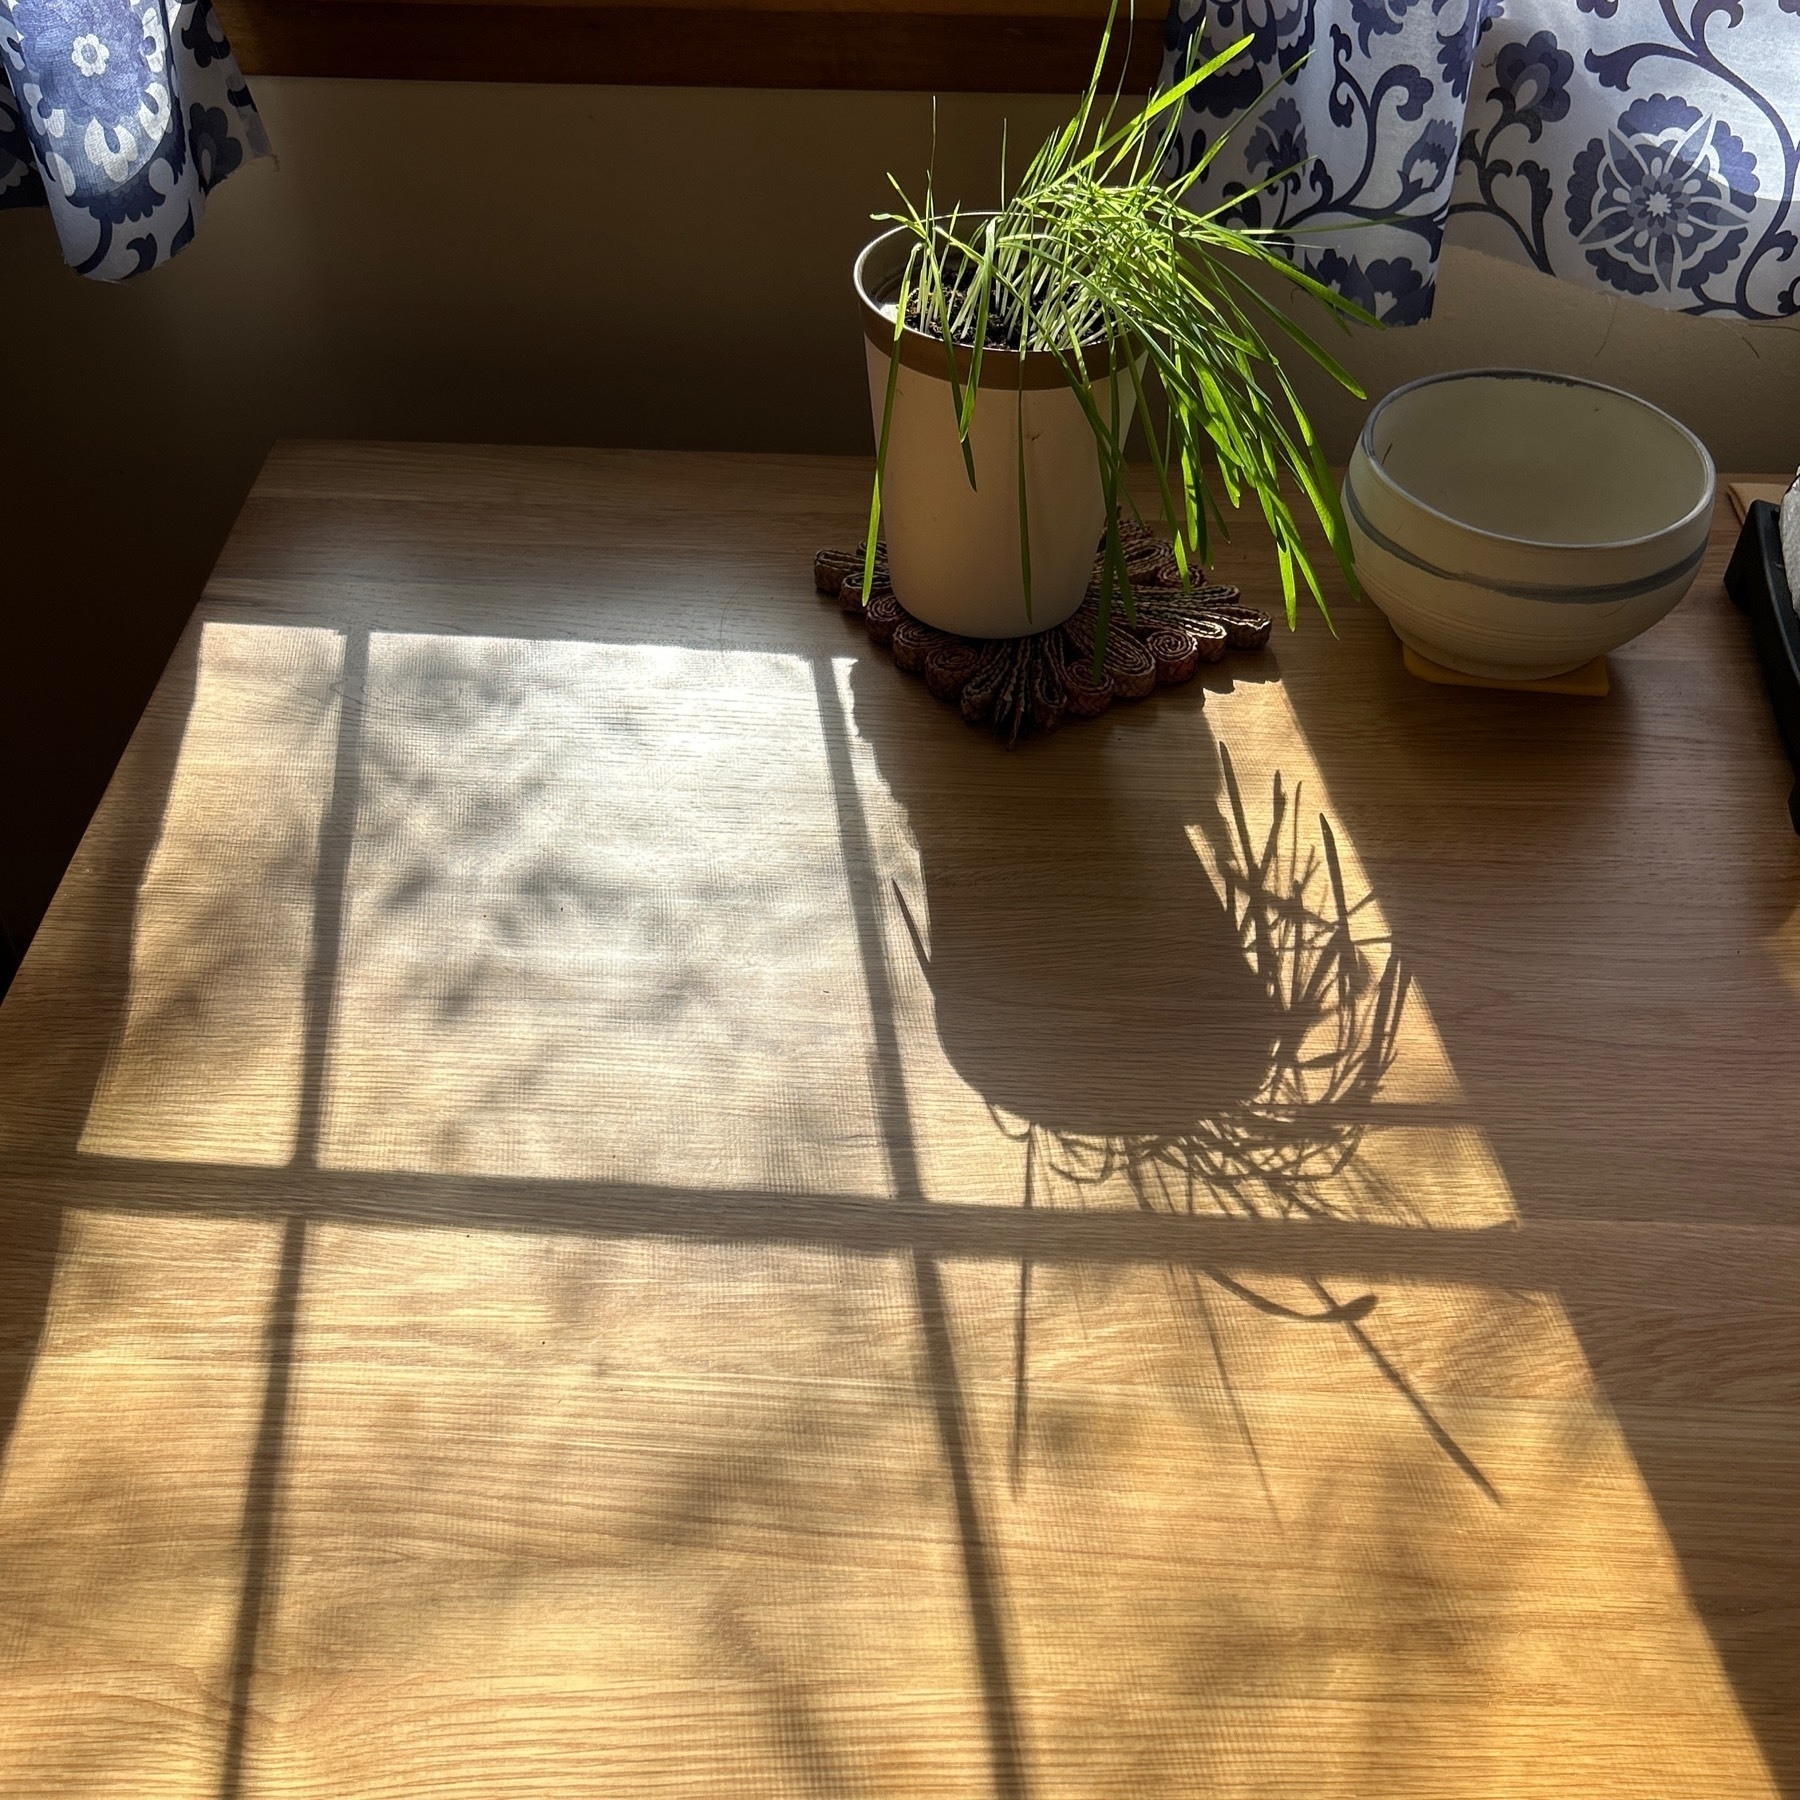 Shadow of window frame wooden table with a pot with grass growing in it on the table. 